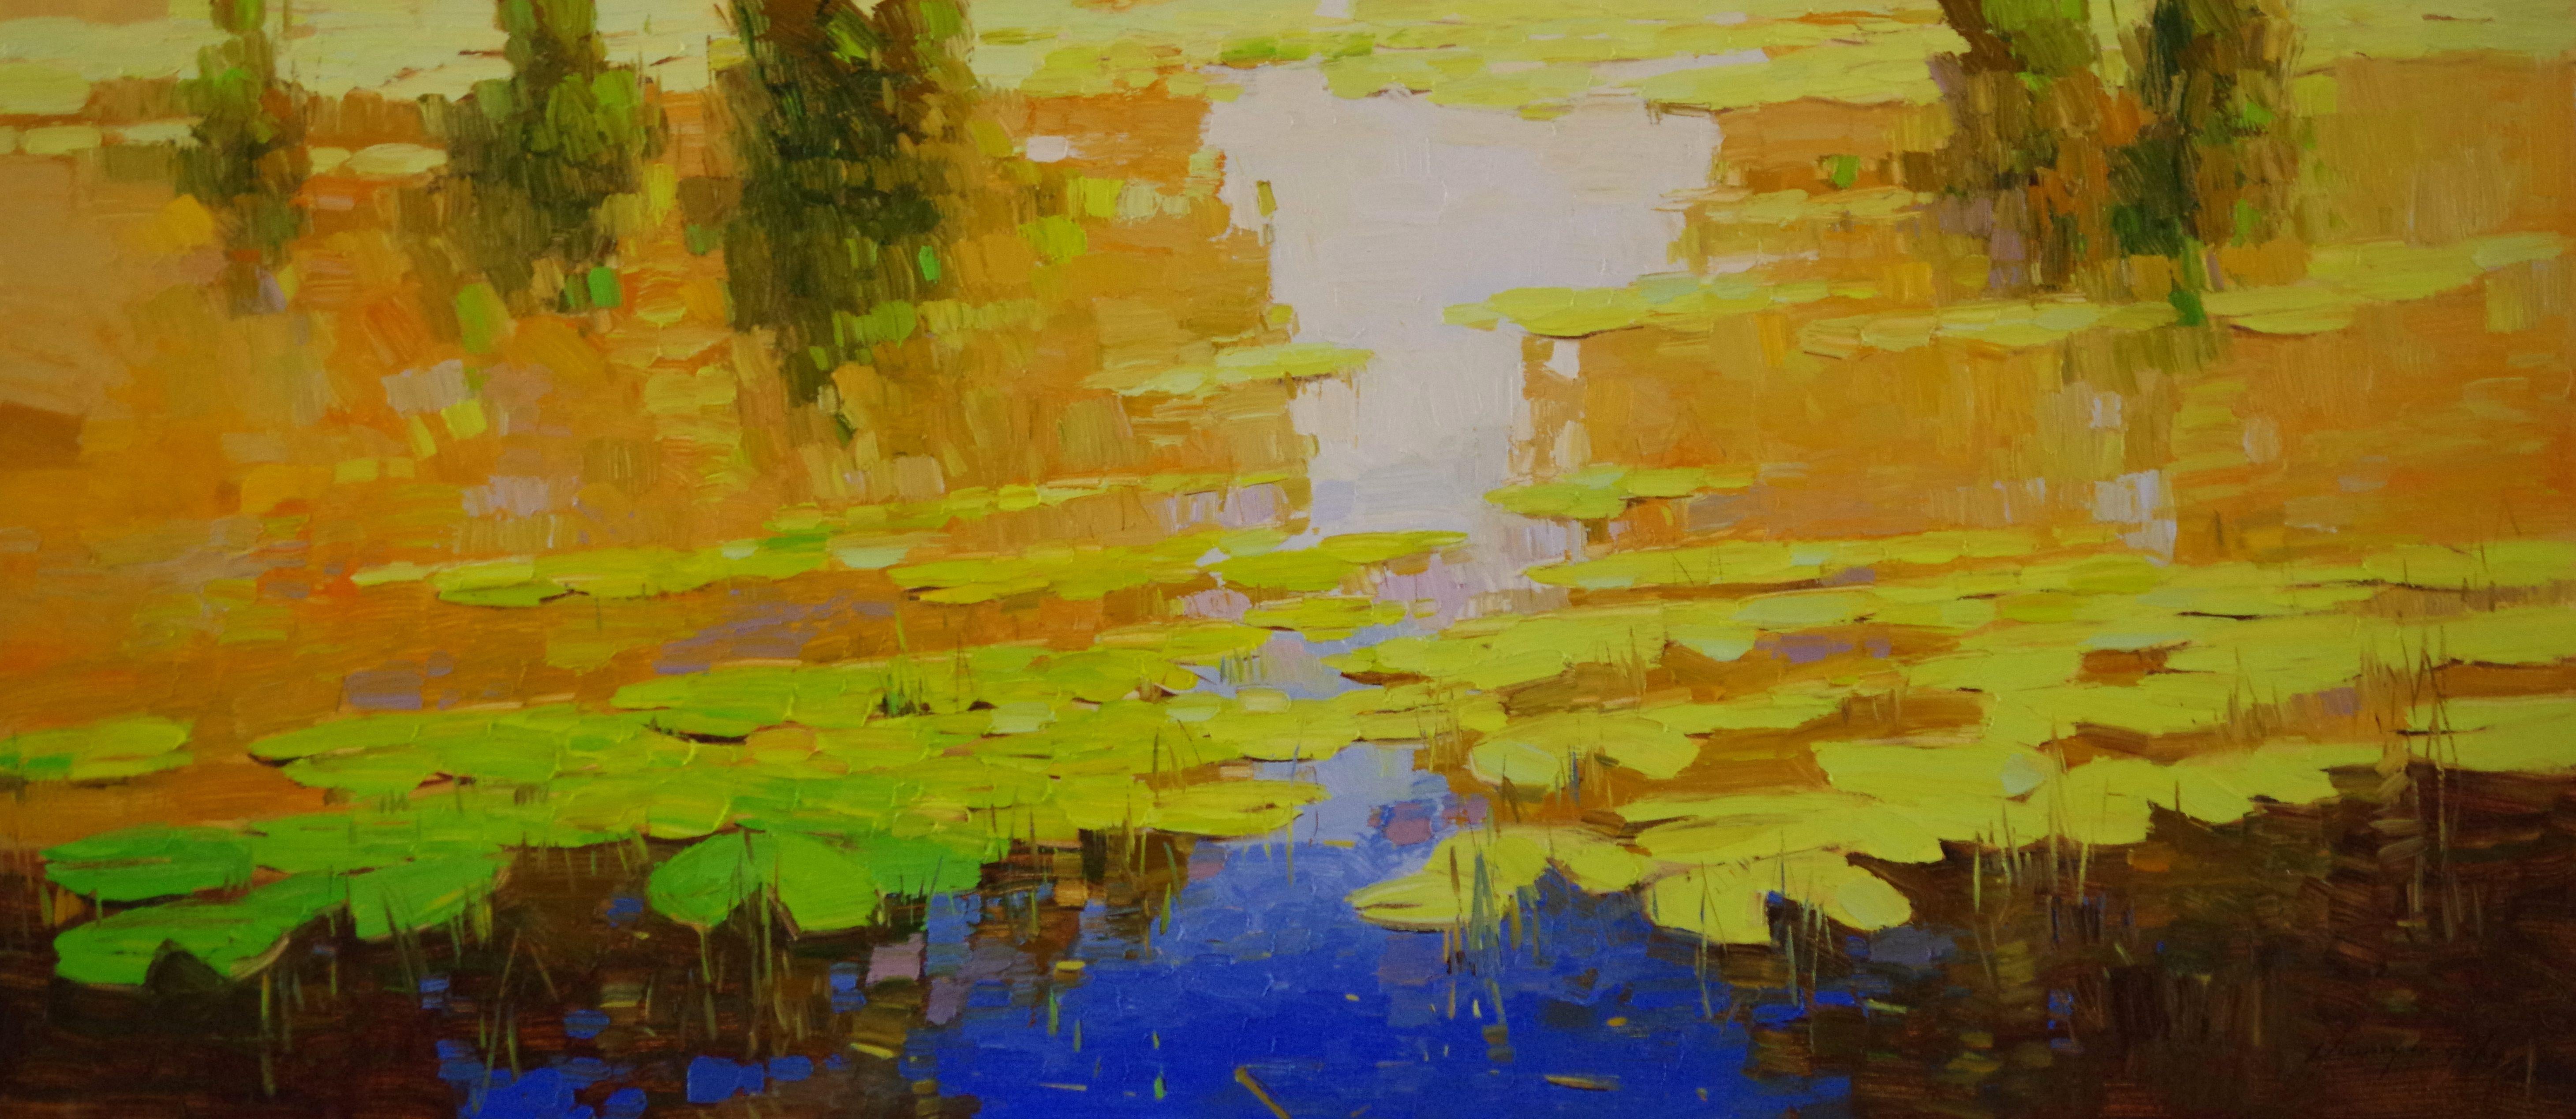 Vahe Yeremyan Landscape Painting - Waterlilies- Autumn, Original Oil Painting, Ready to Hang